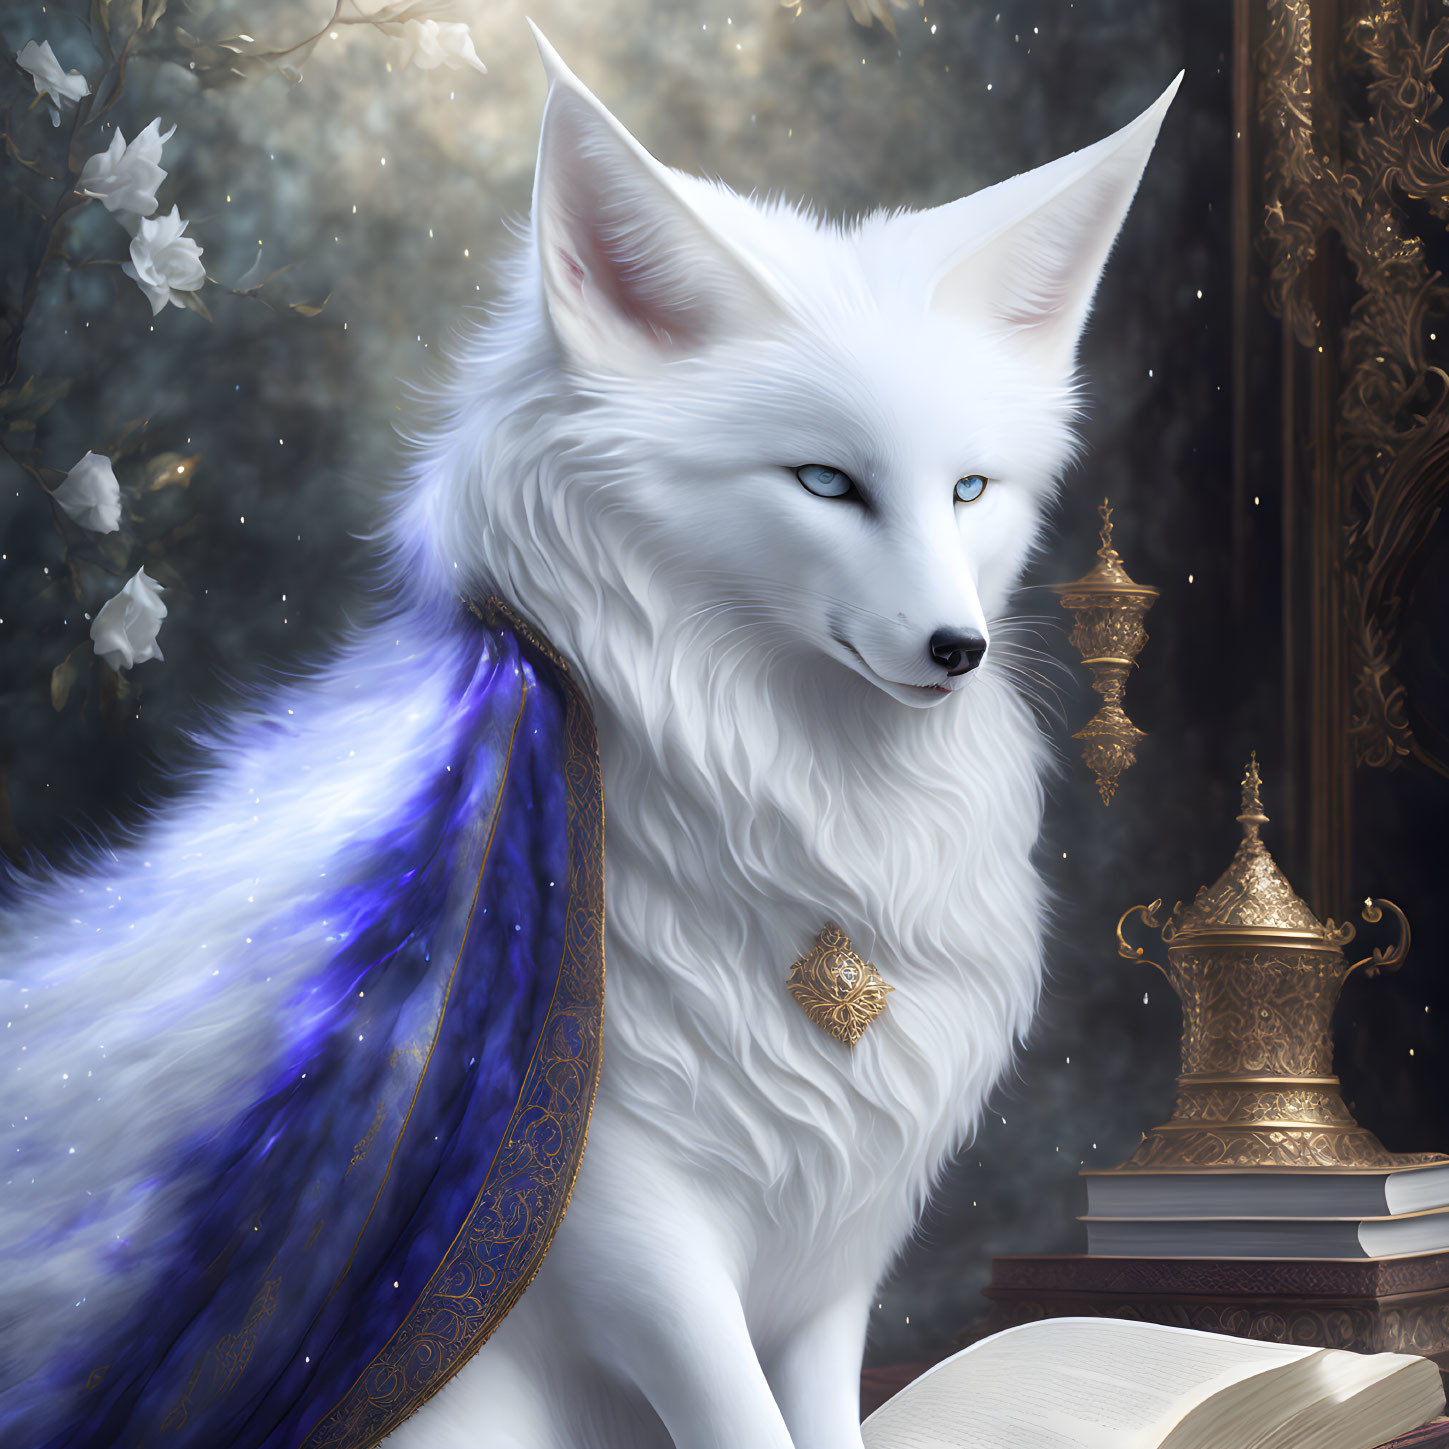 White fox with blue and gold cloak next to brass objects and open book